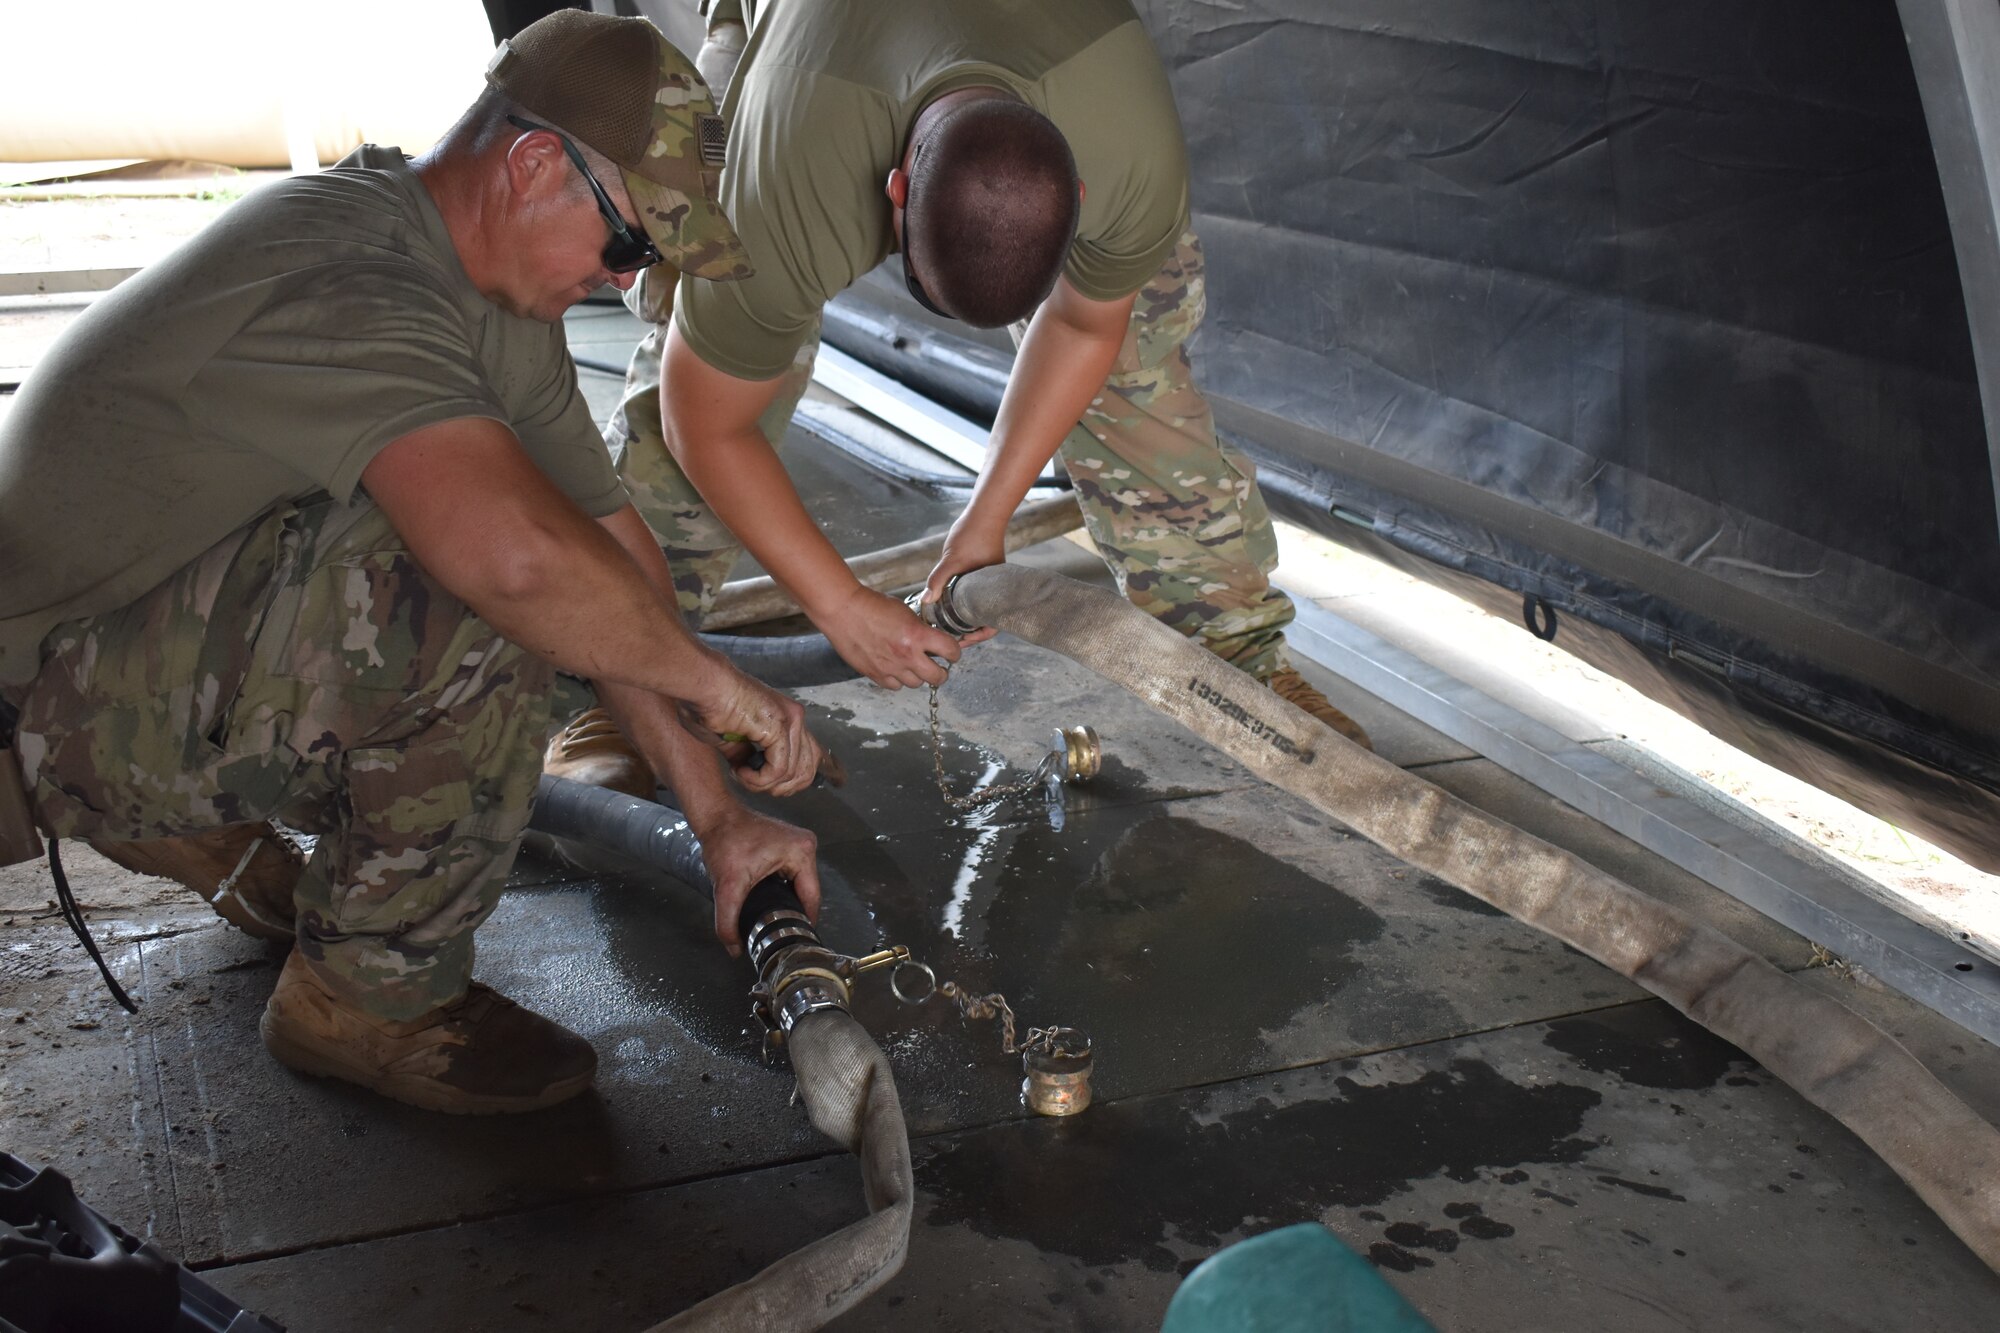 Tech. Sgts. Jerl Dunn and Brendan Muchow, water and fuels system maintenance craftsmen for the 776th Expeditionary Air Base Squadron connect a hose at Camp Simba at Manda Bay, May 19, 2021. The technicians installed several reverse osmosis water purification units (ROWPU) which are used to purify and sanitize water for drinking and personal hygiene use at Camp Simba.